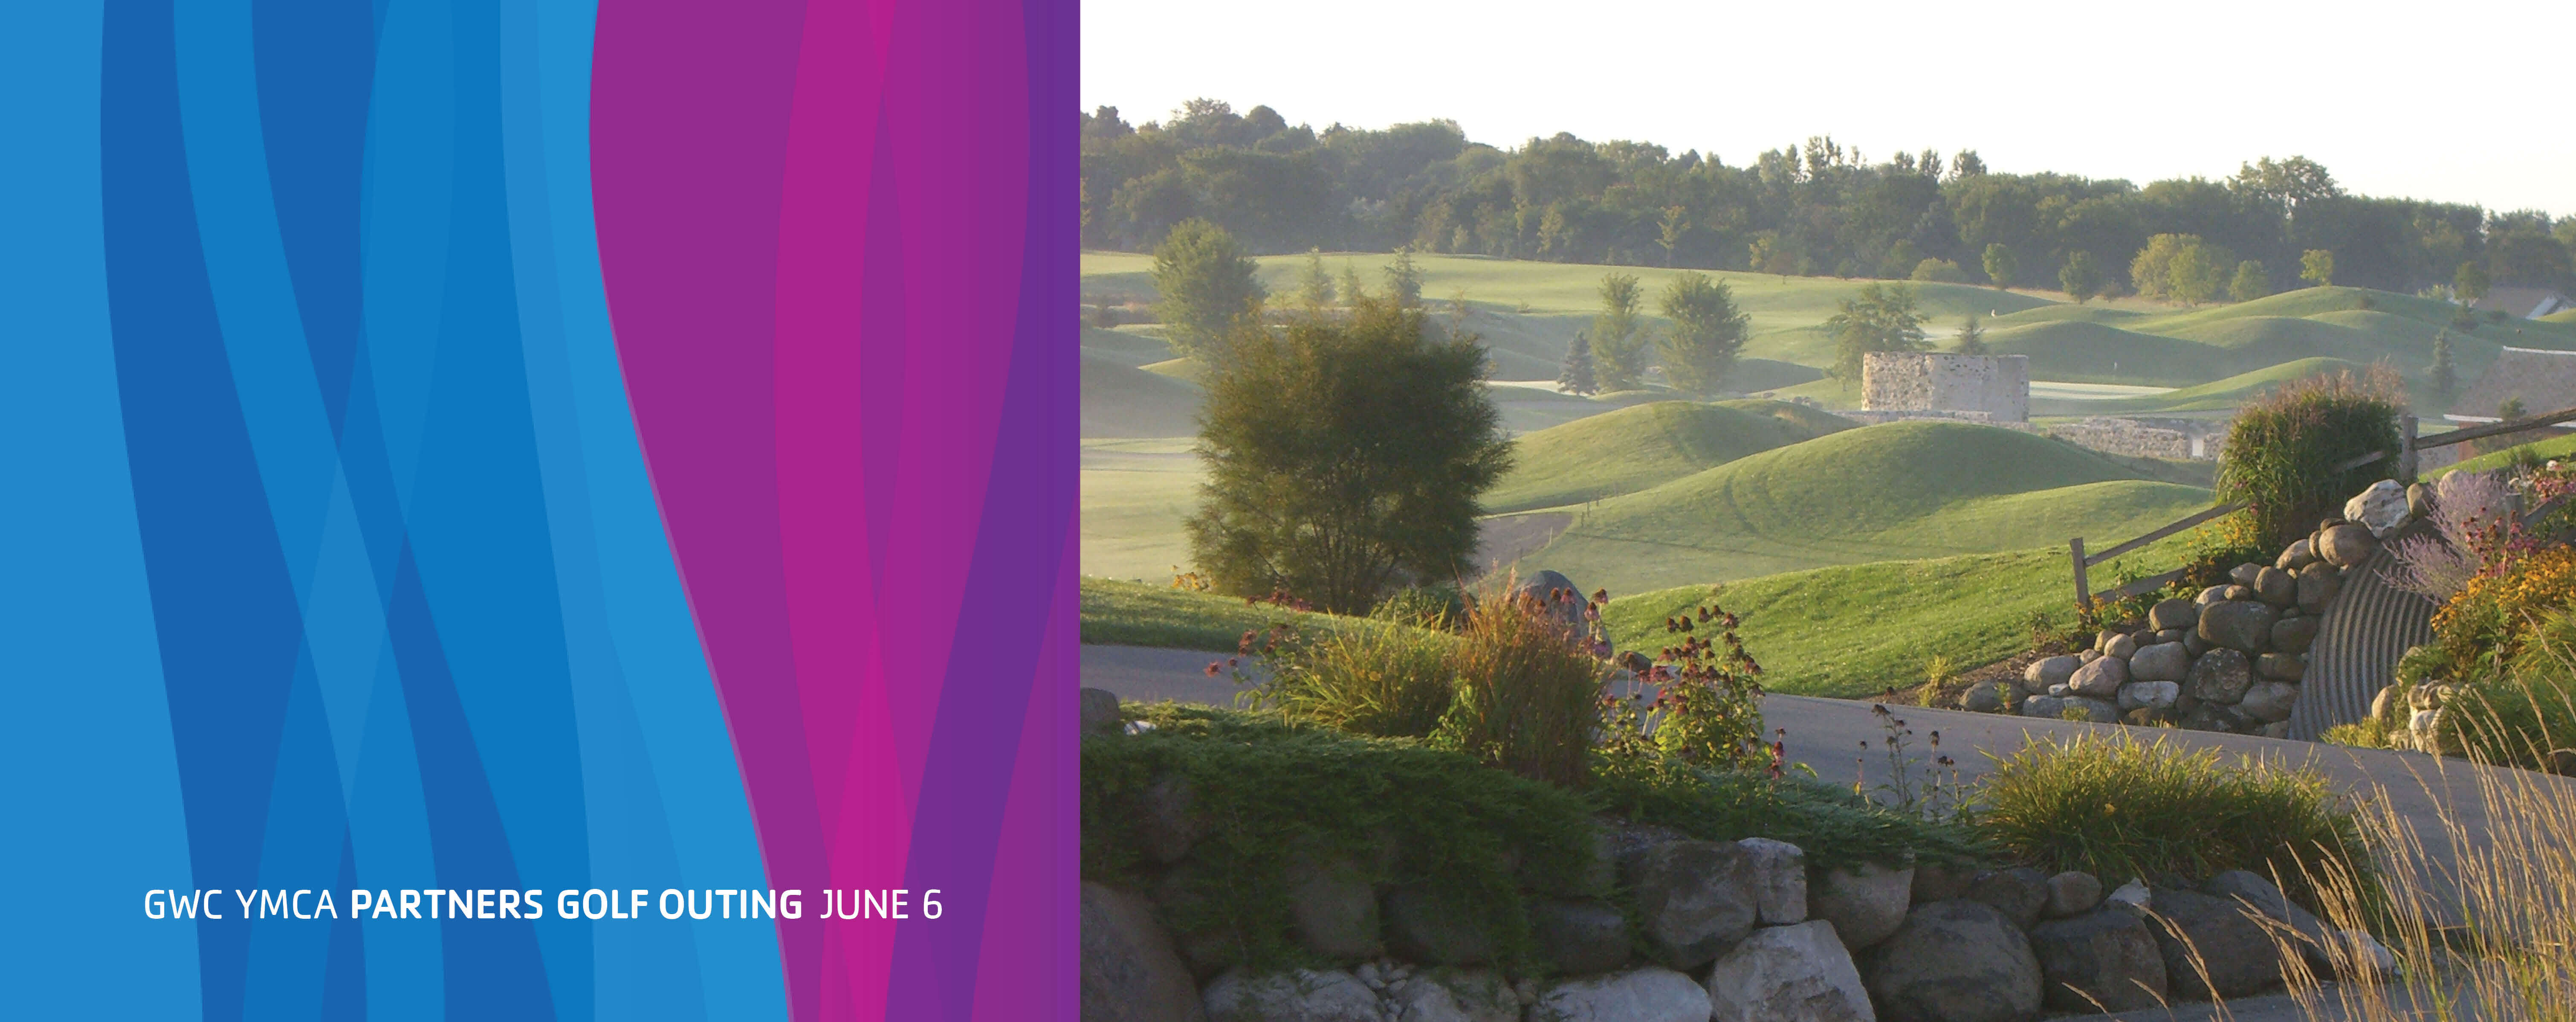 GWC YMCA Partners Golf Outing Tuesday, June 6